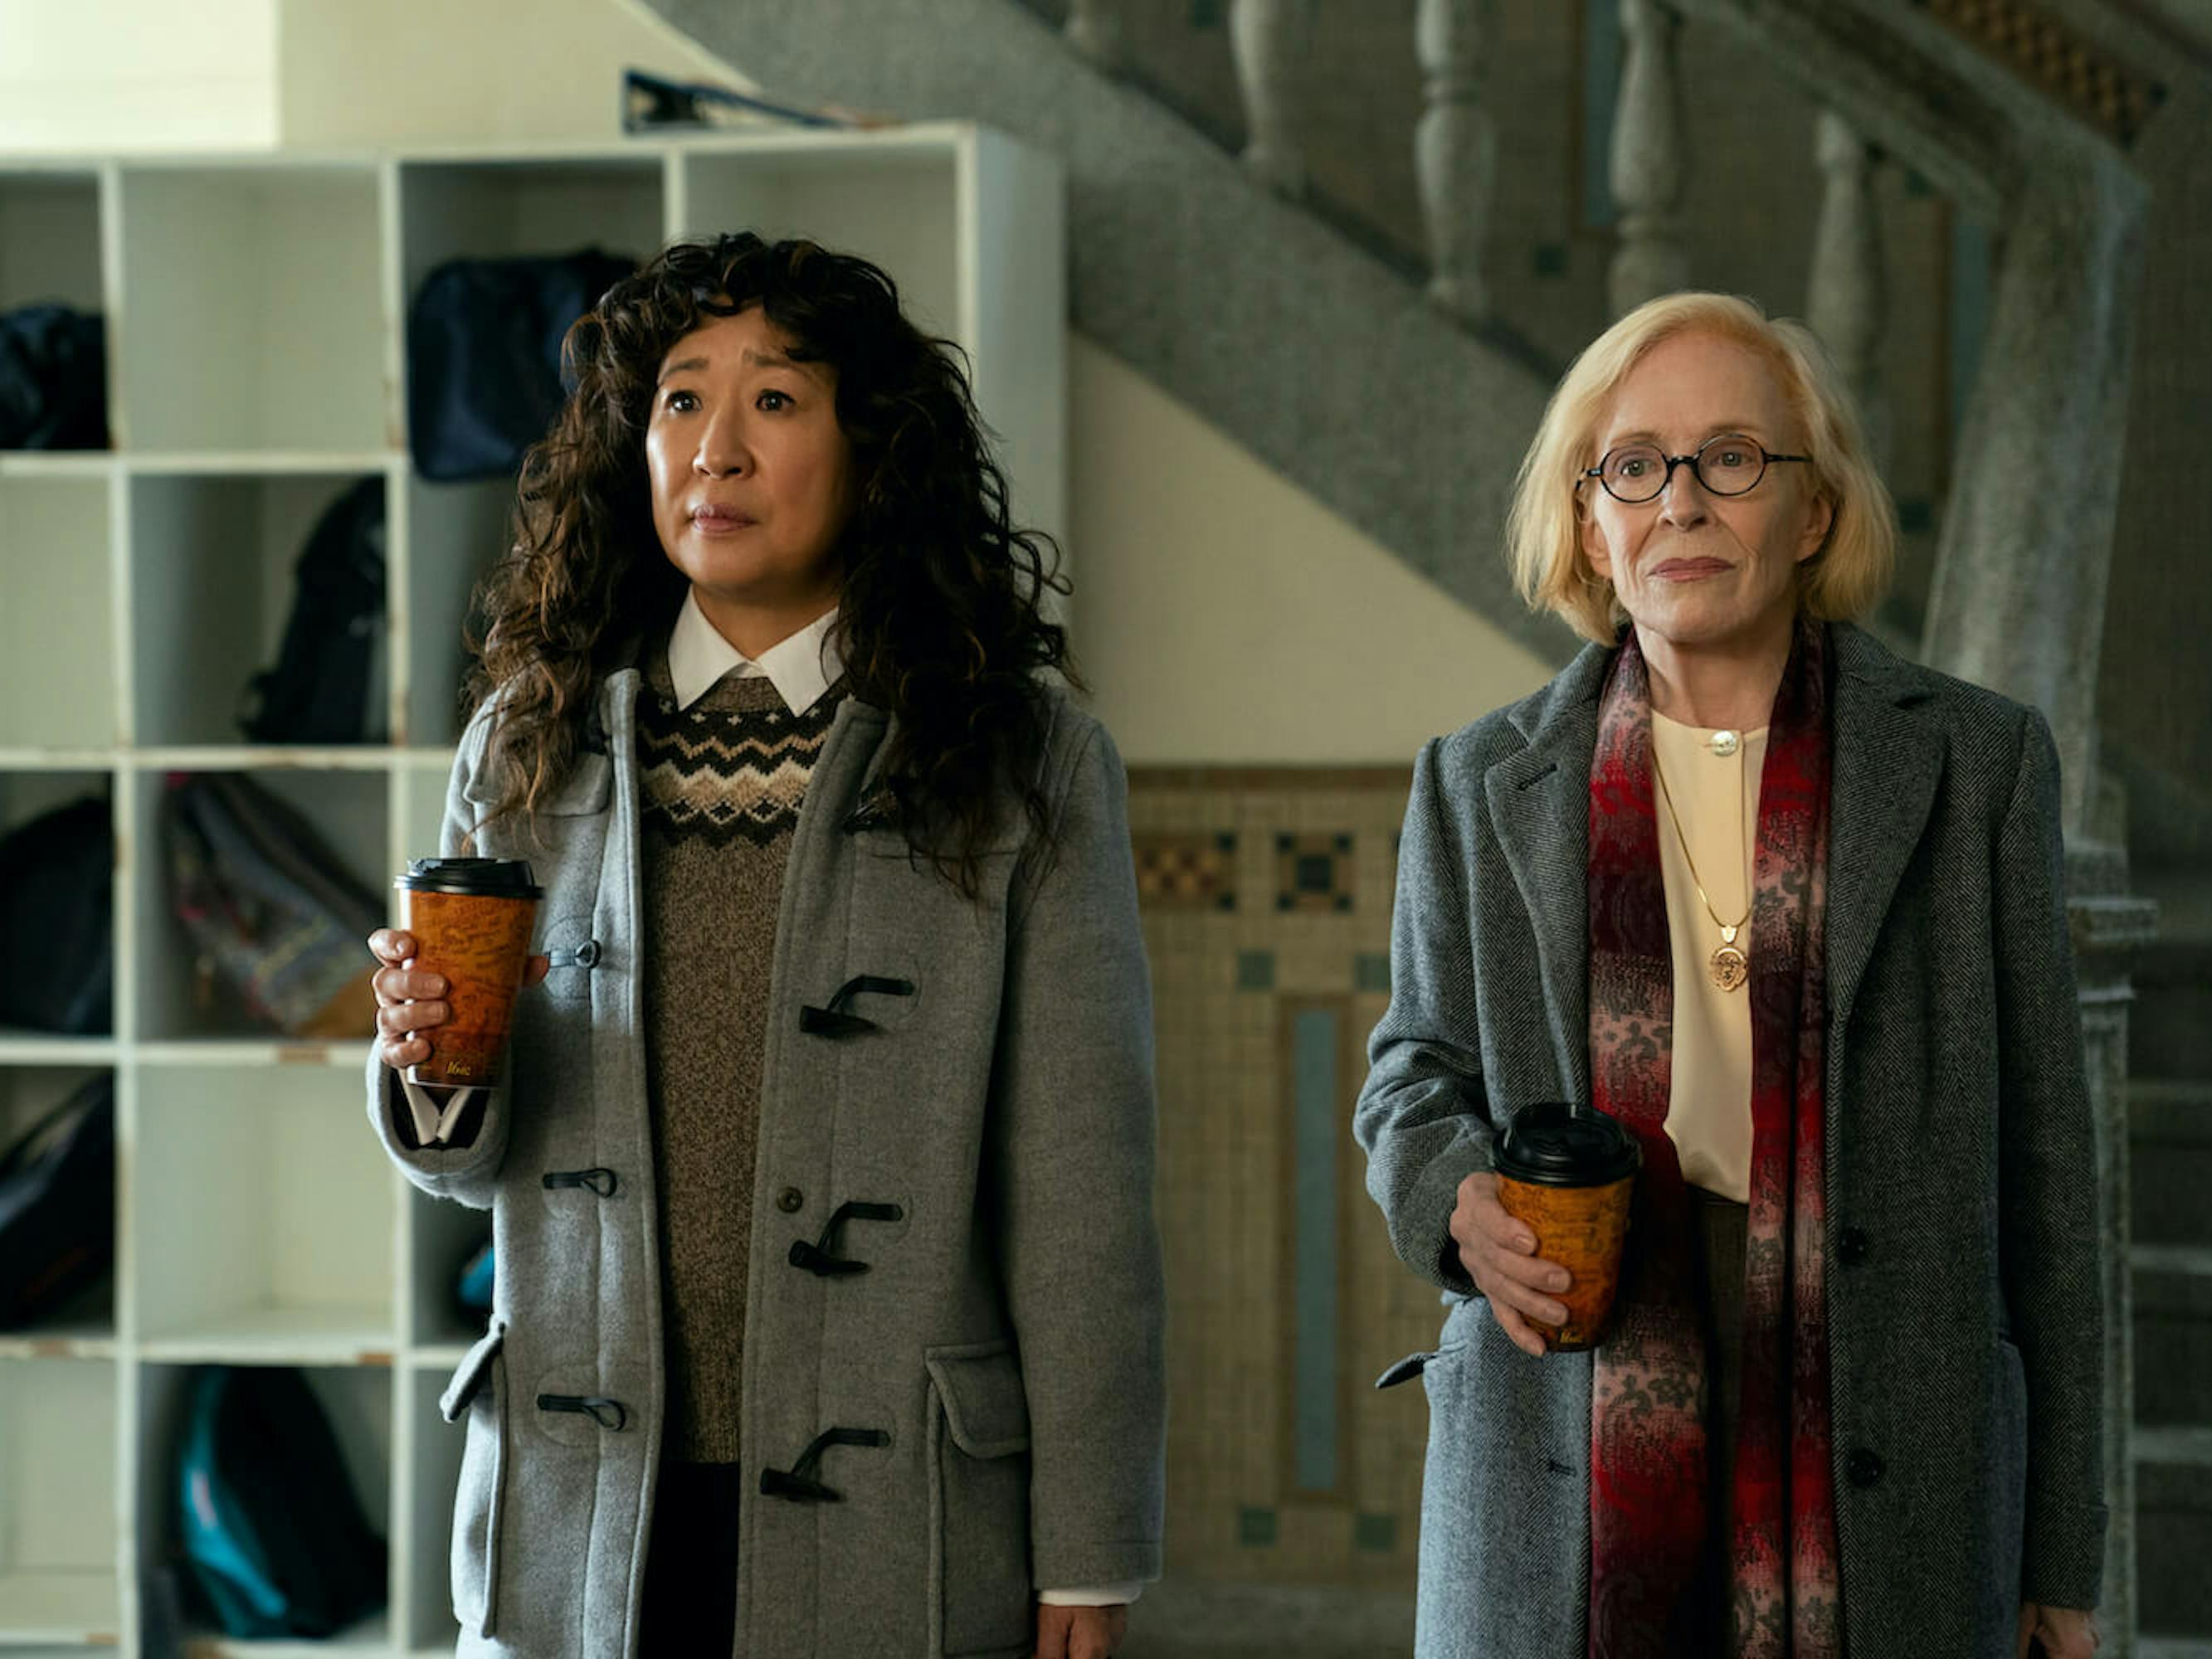 Dr. Ji-Yoon Kim (Sandra Oh) and Professor Joan Hambling (Holland Taylor) wear wool coats and sweaters and hold coffee to-go cups.